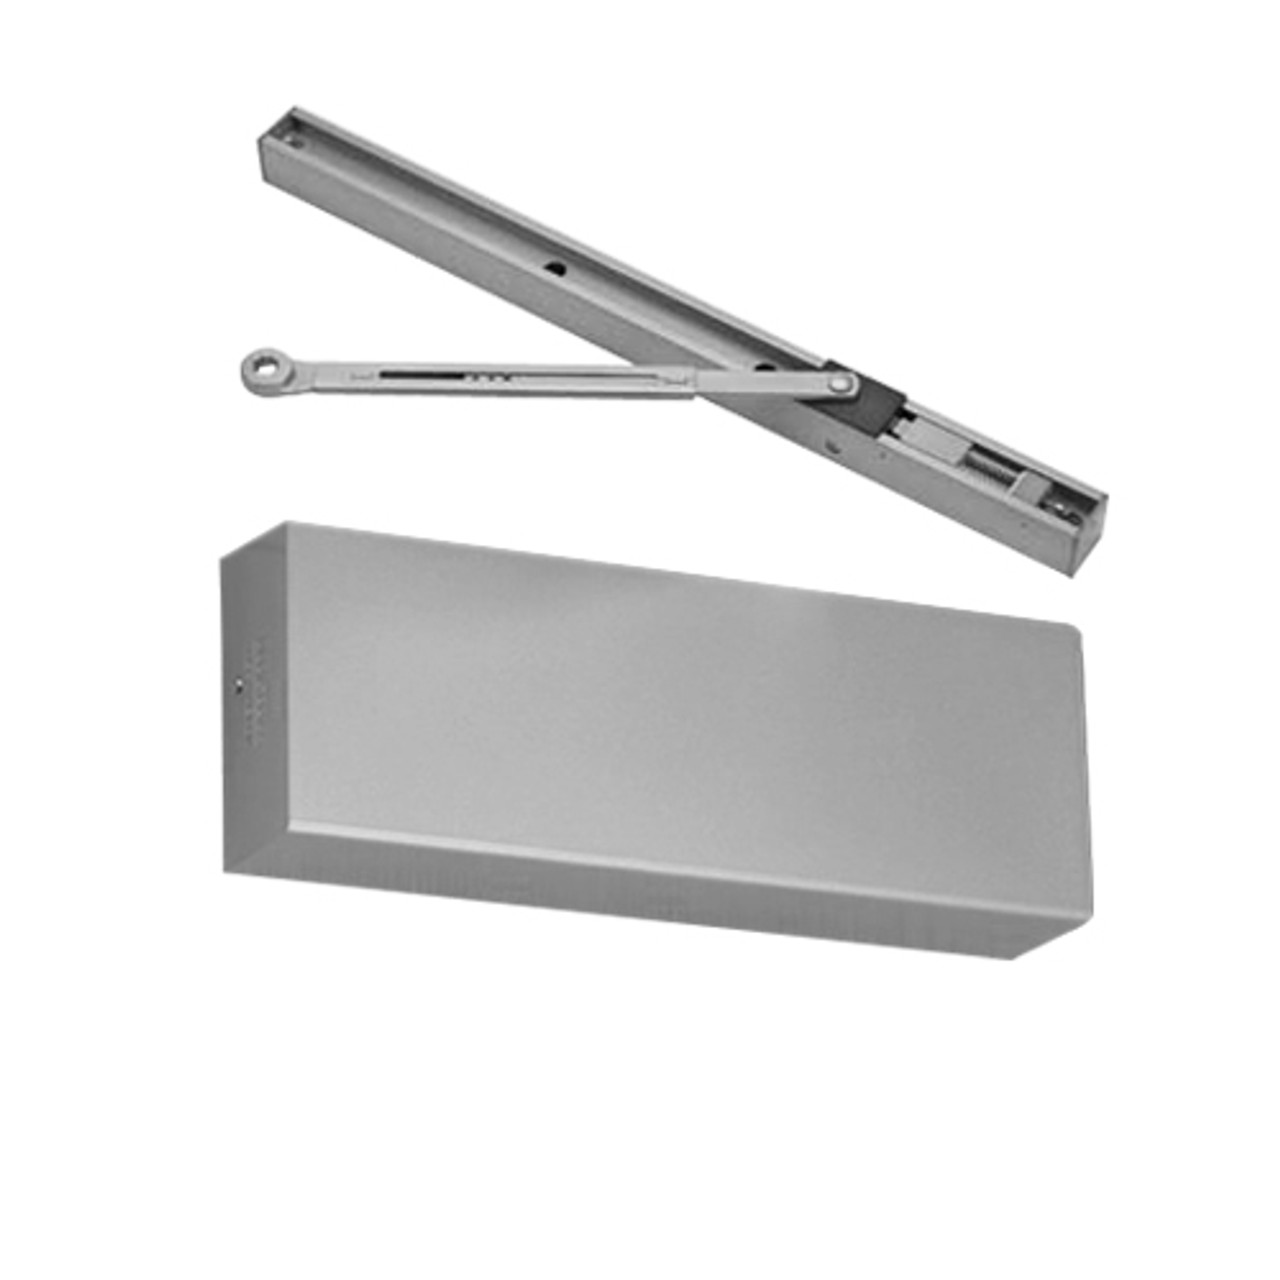 PS9500ST-689 Norton 9500 Series Non-Hold Open Cast Iron Door Closer with Push Side Slide Track in Aluminum Finish